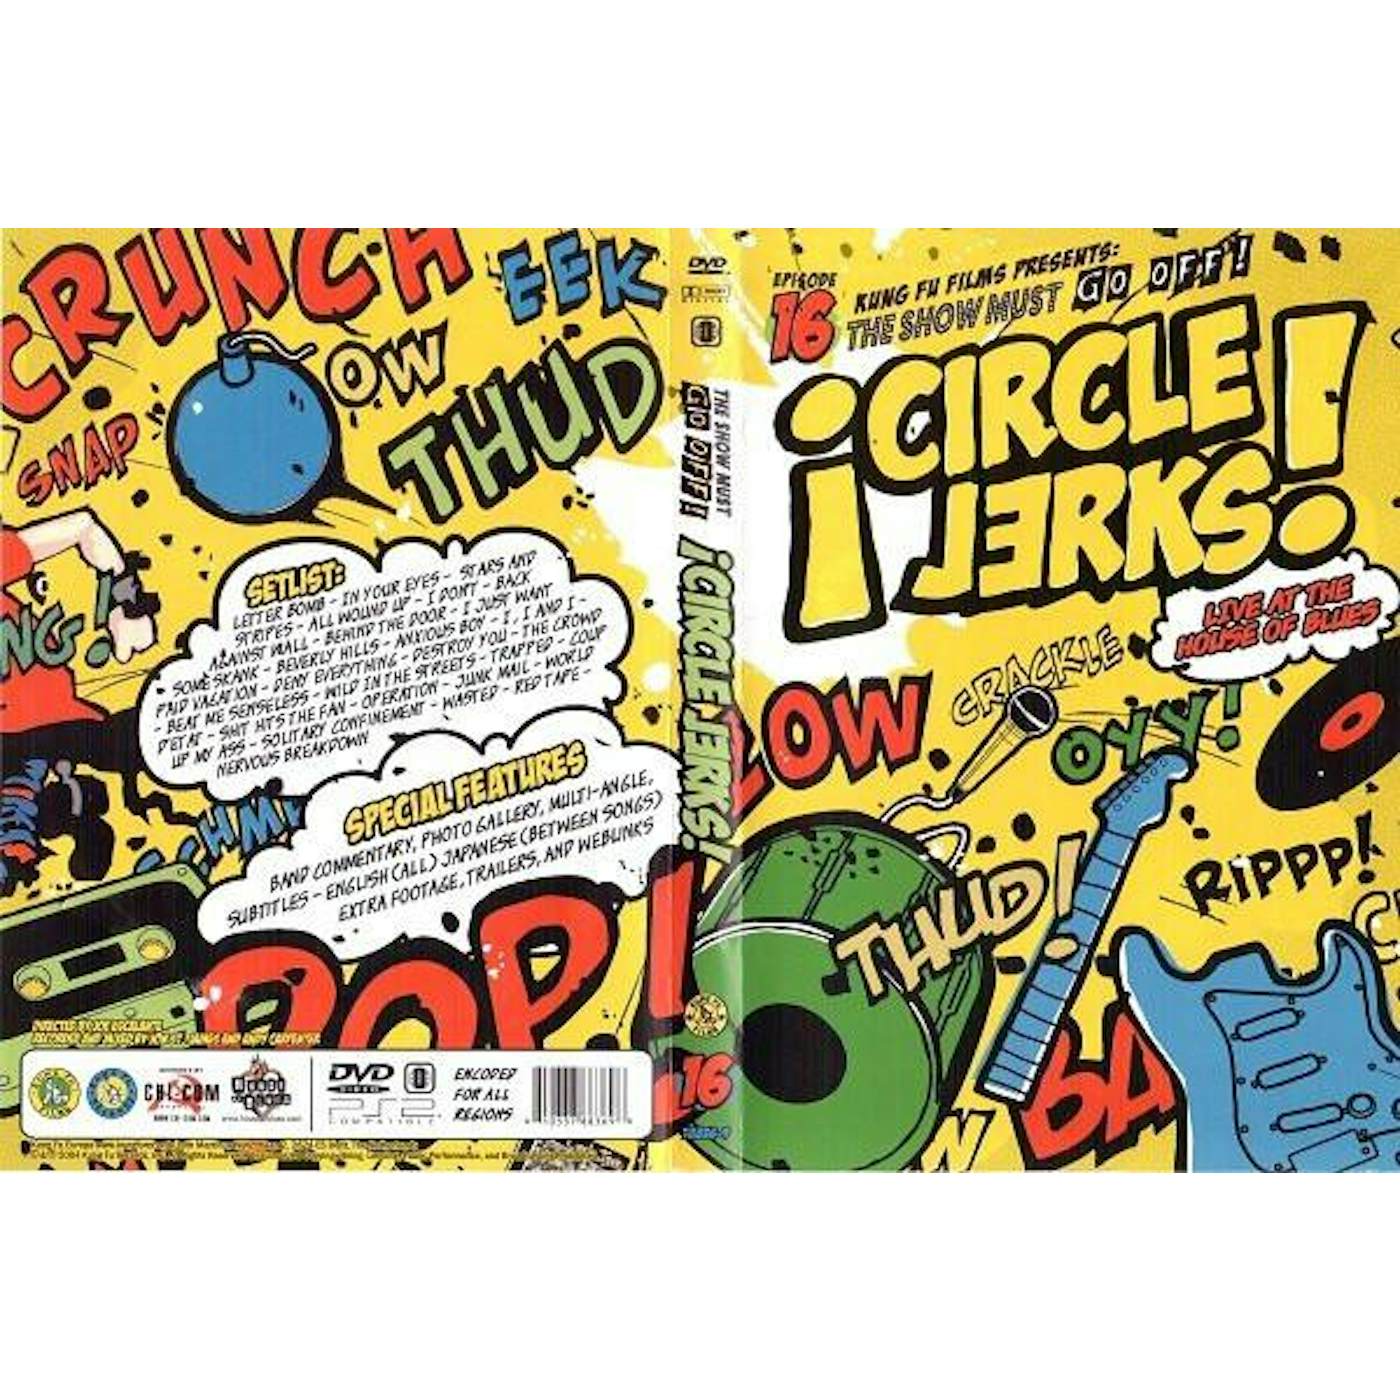 Circle Jerks LIVE AT THE HOUSE OF BLUES CD